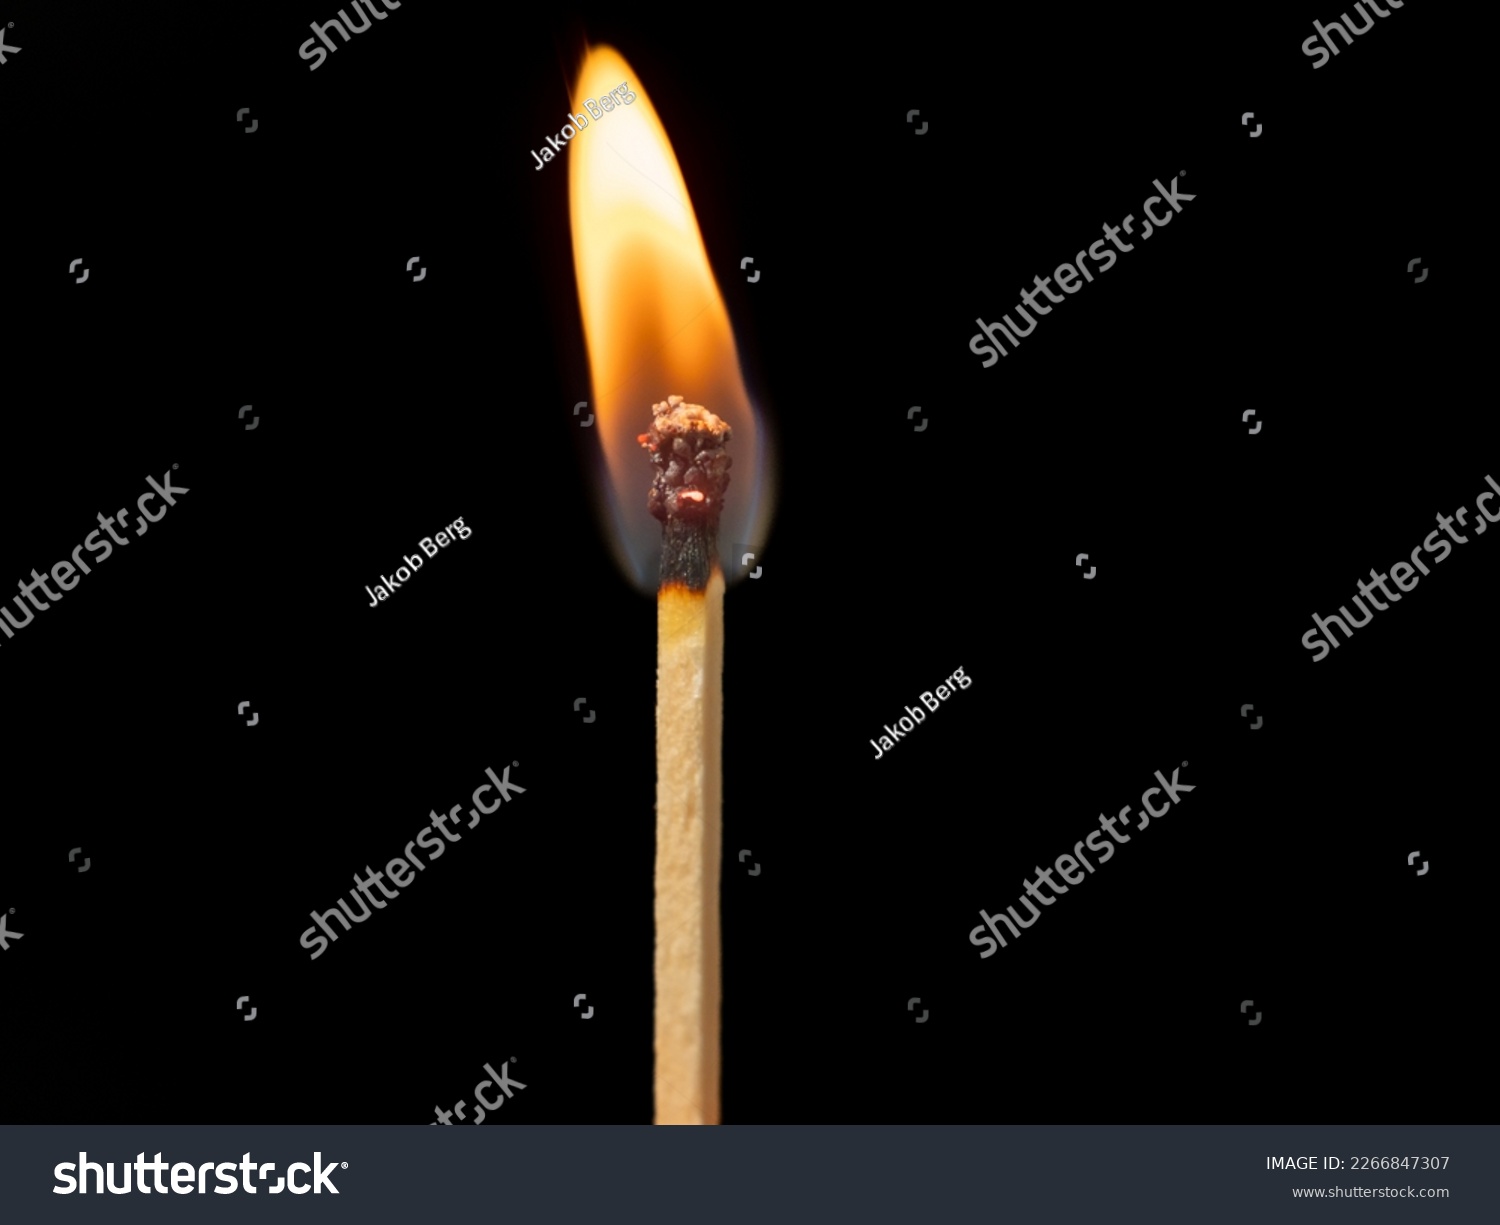 Burning match on a black background. Flame from a lit match. Close-up. #2266847307